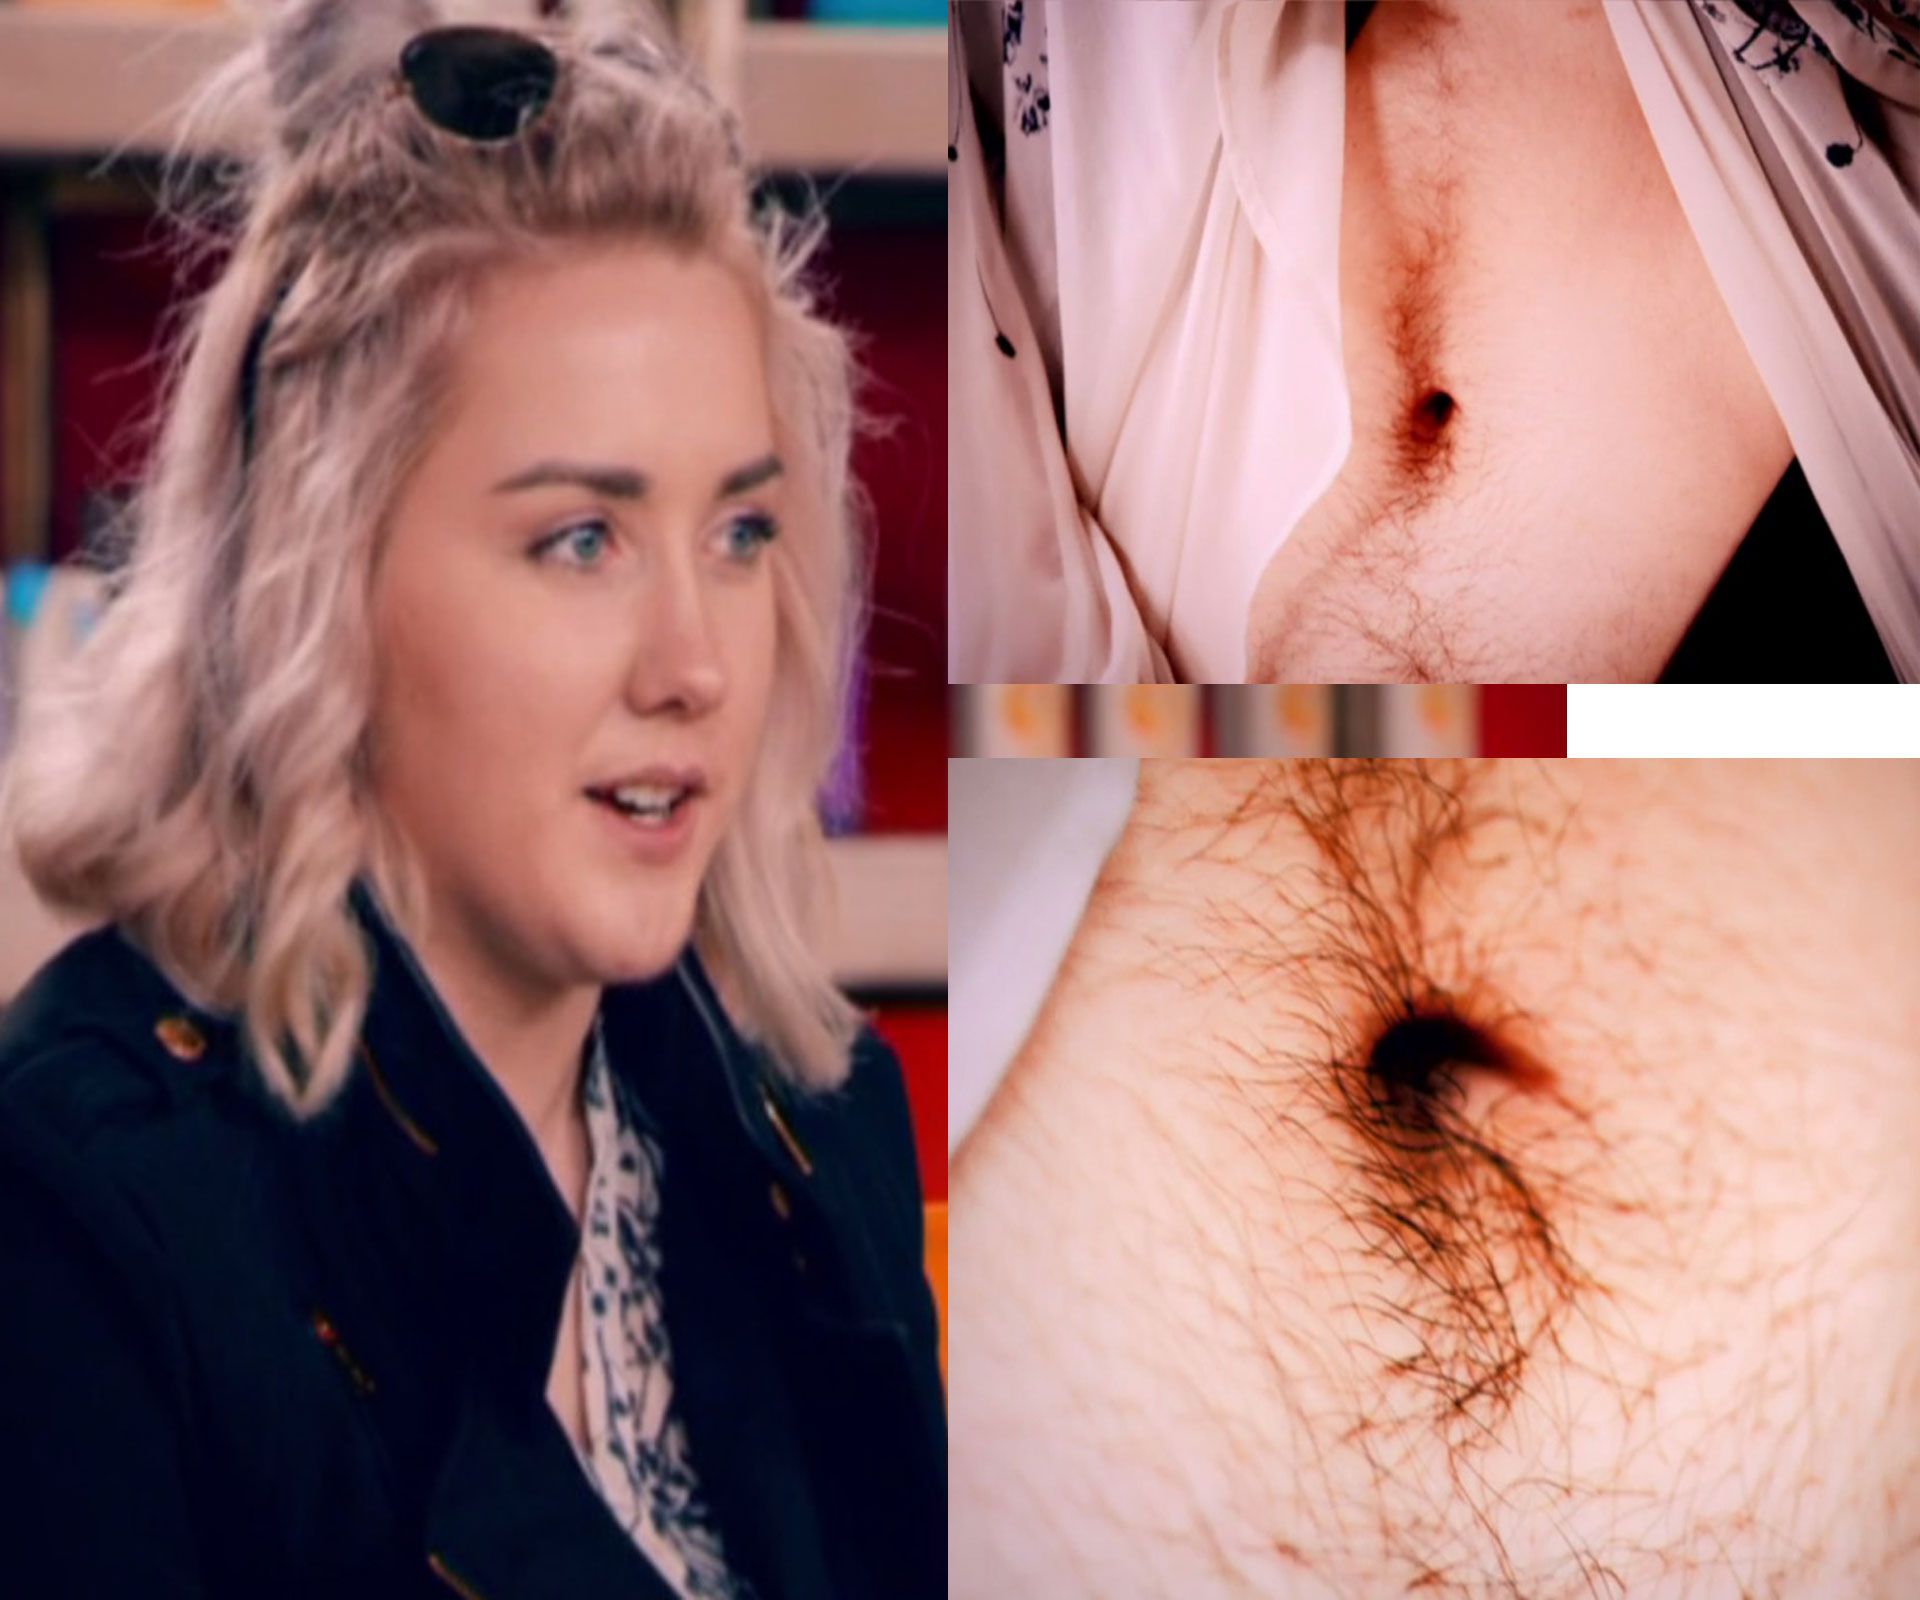 ‘I’m too hairy to date’: Woman’s embarrassment over her thick stomach fuzz